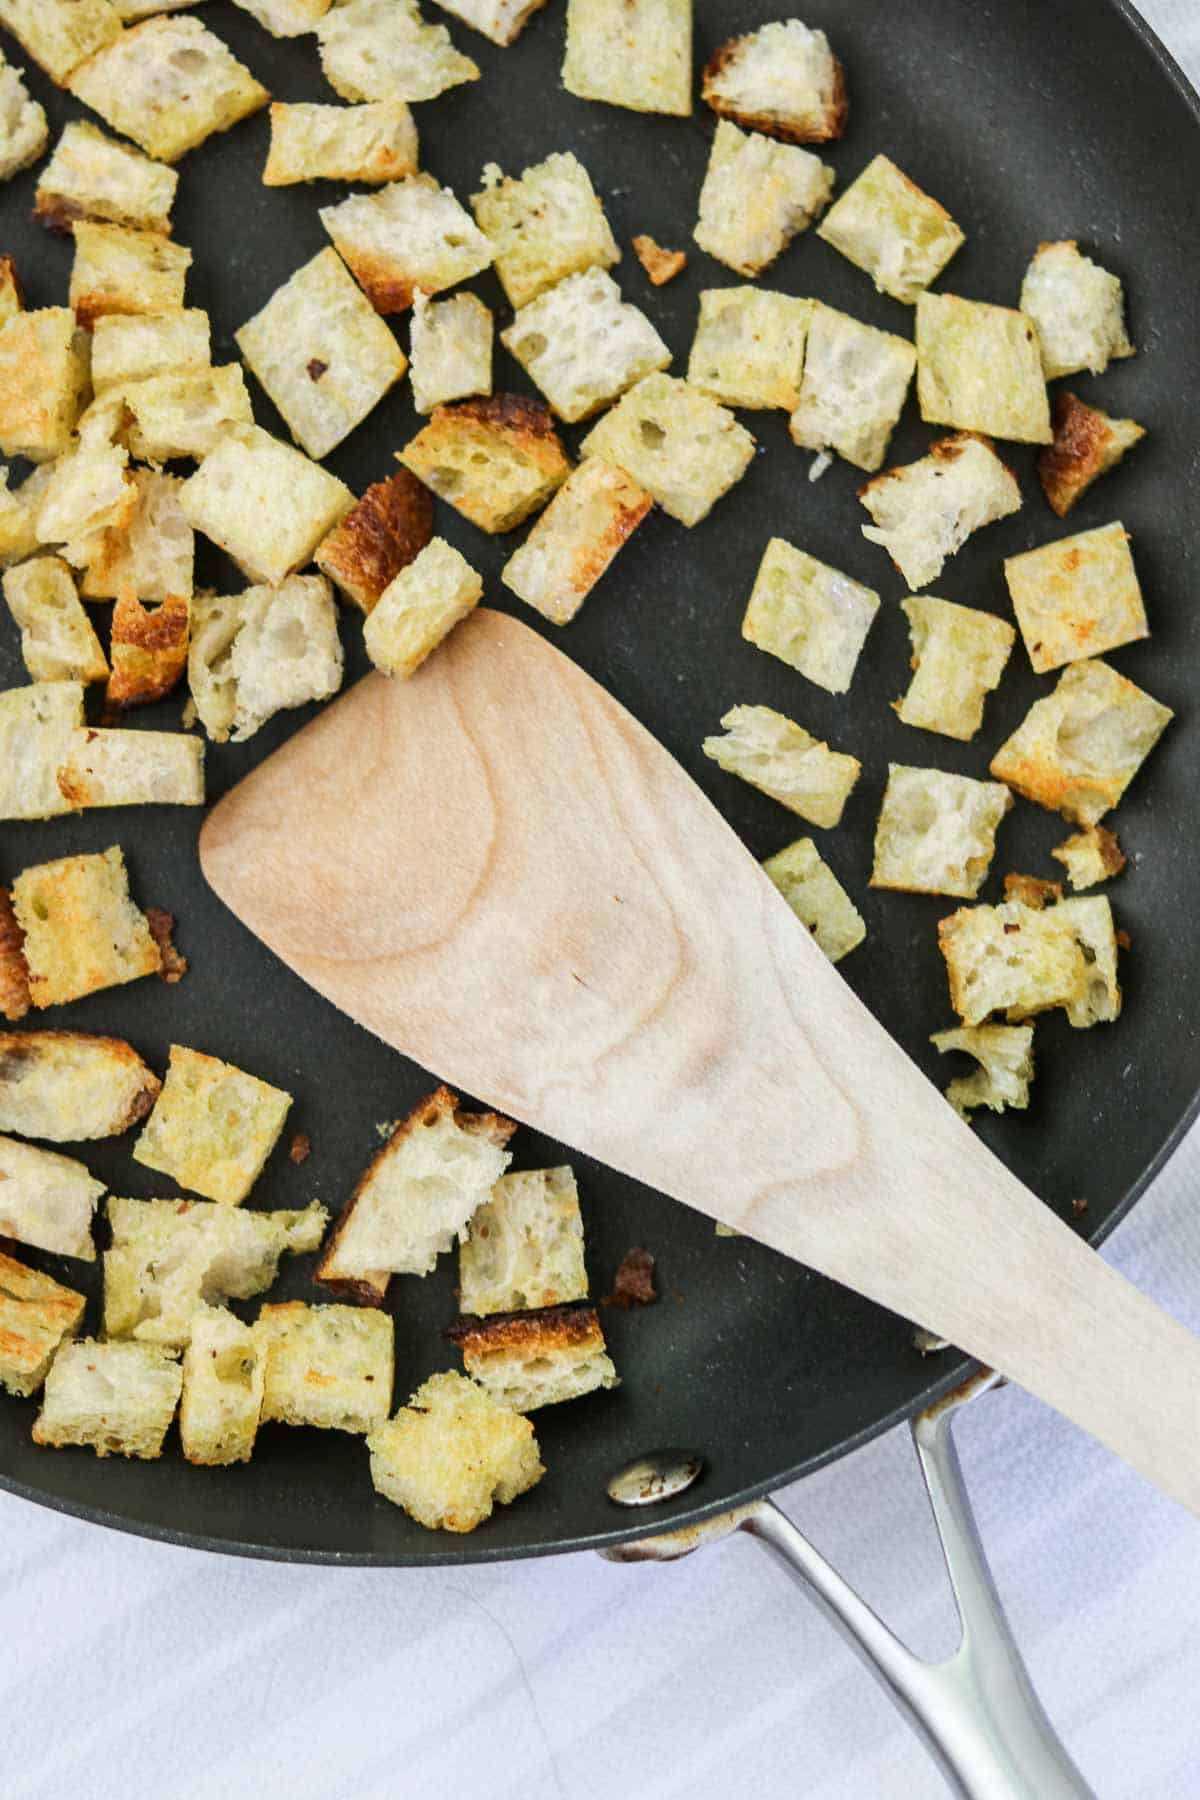 Croutons in a skillet with a wooden spatula.